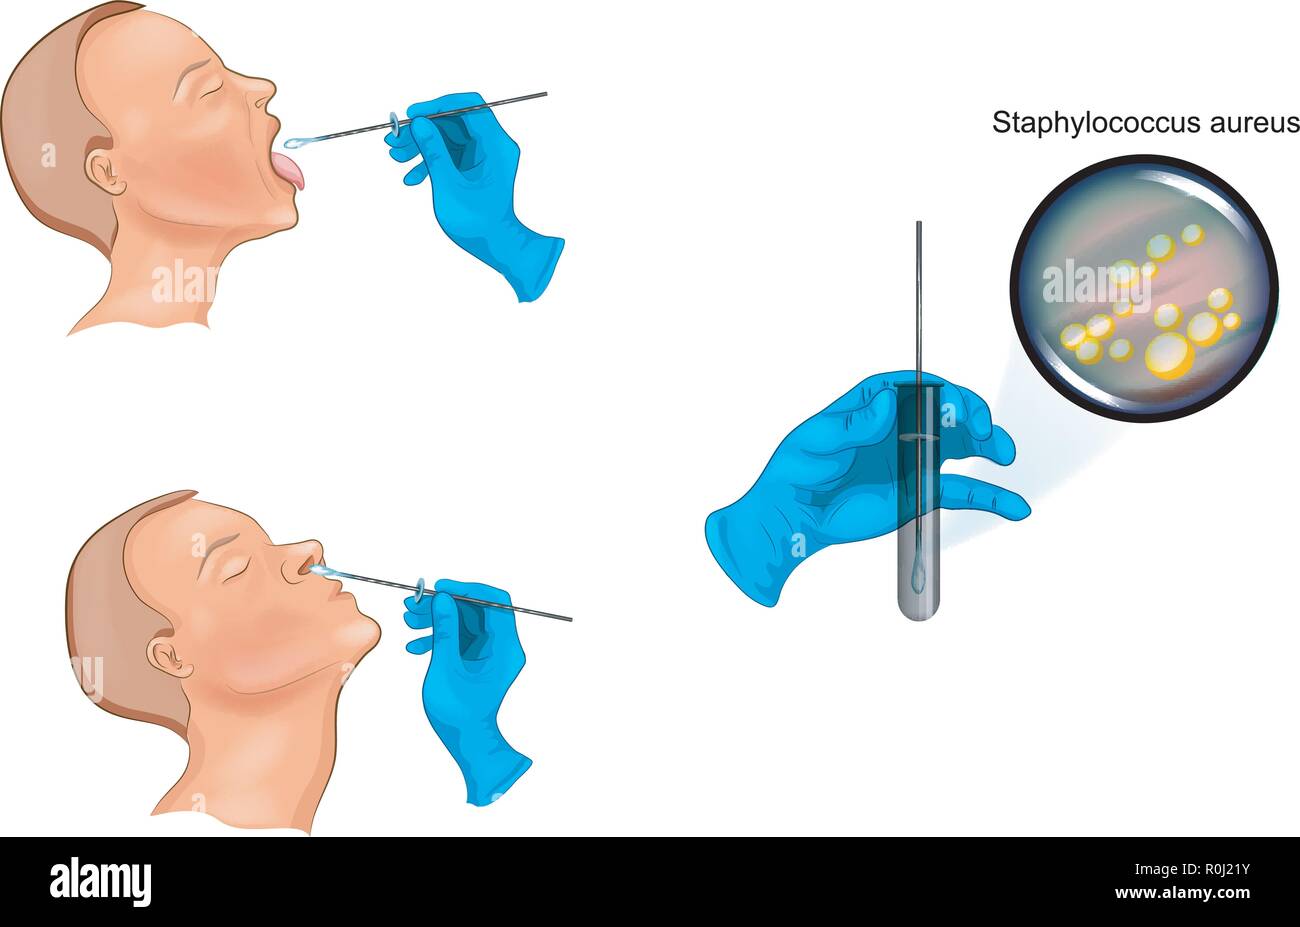 vector illustration of a swab from the nose and throat Stock Vector